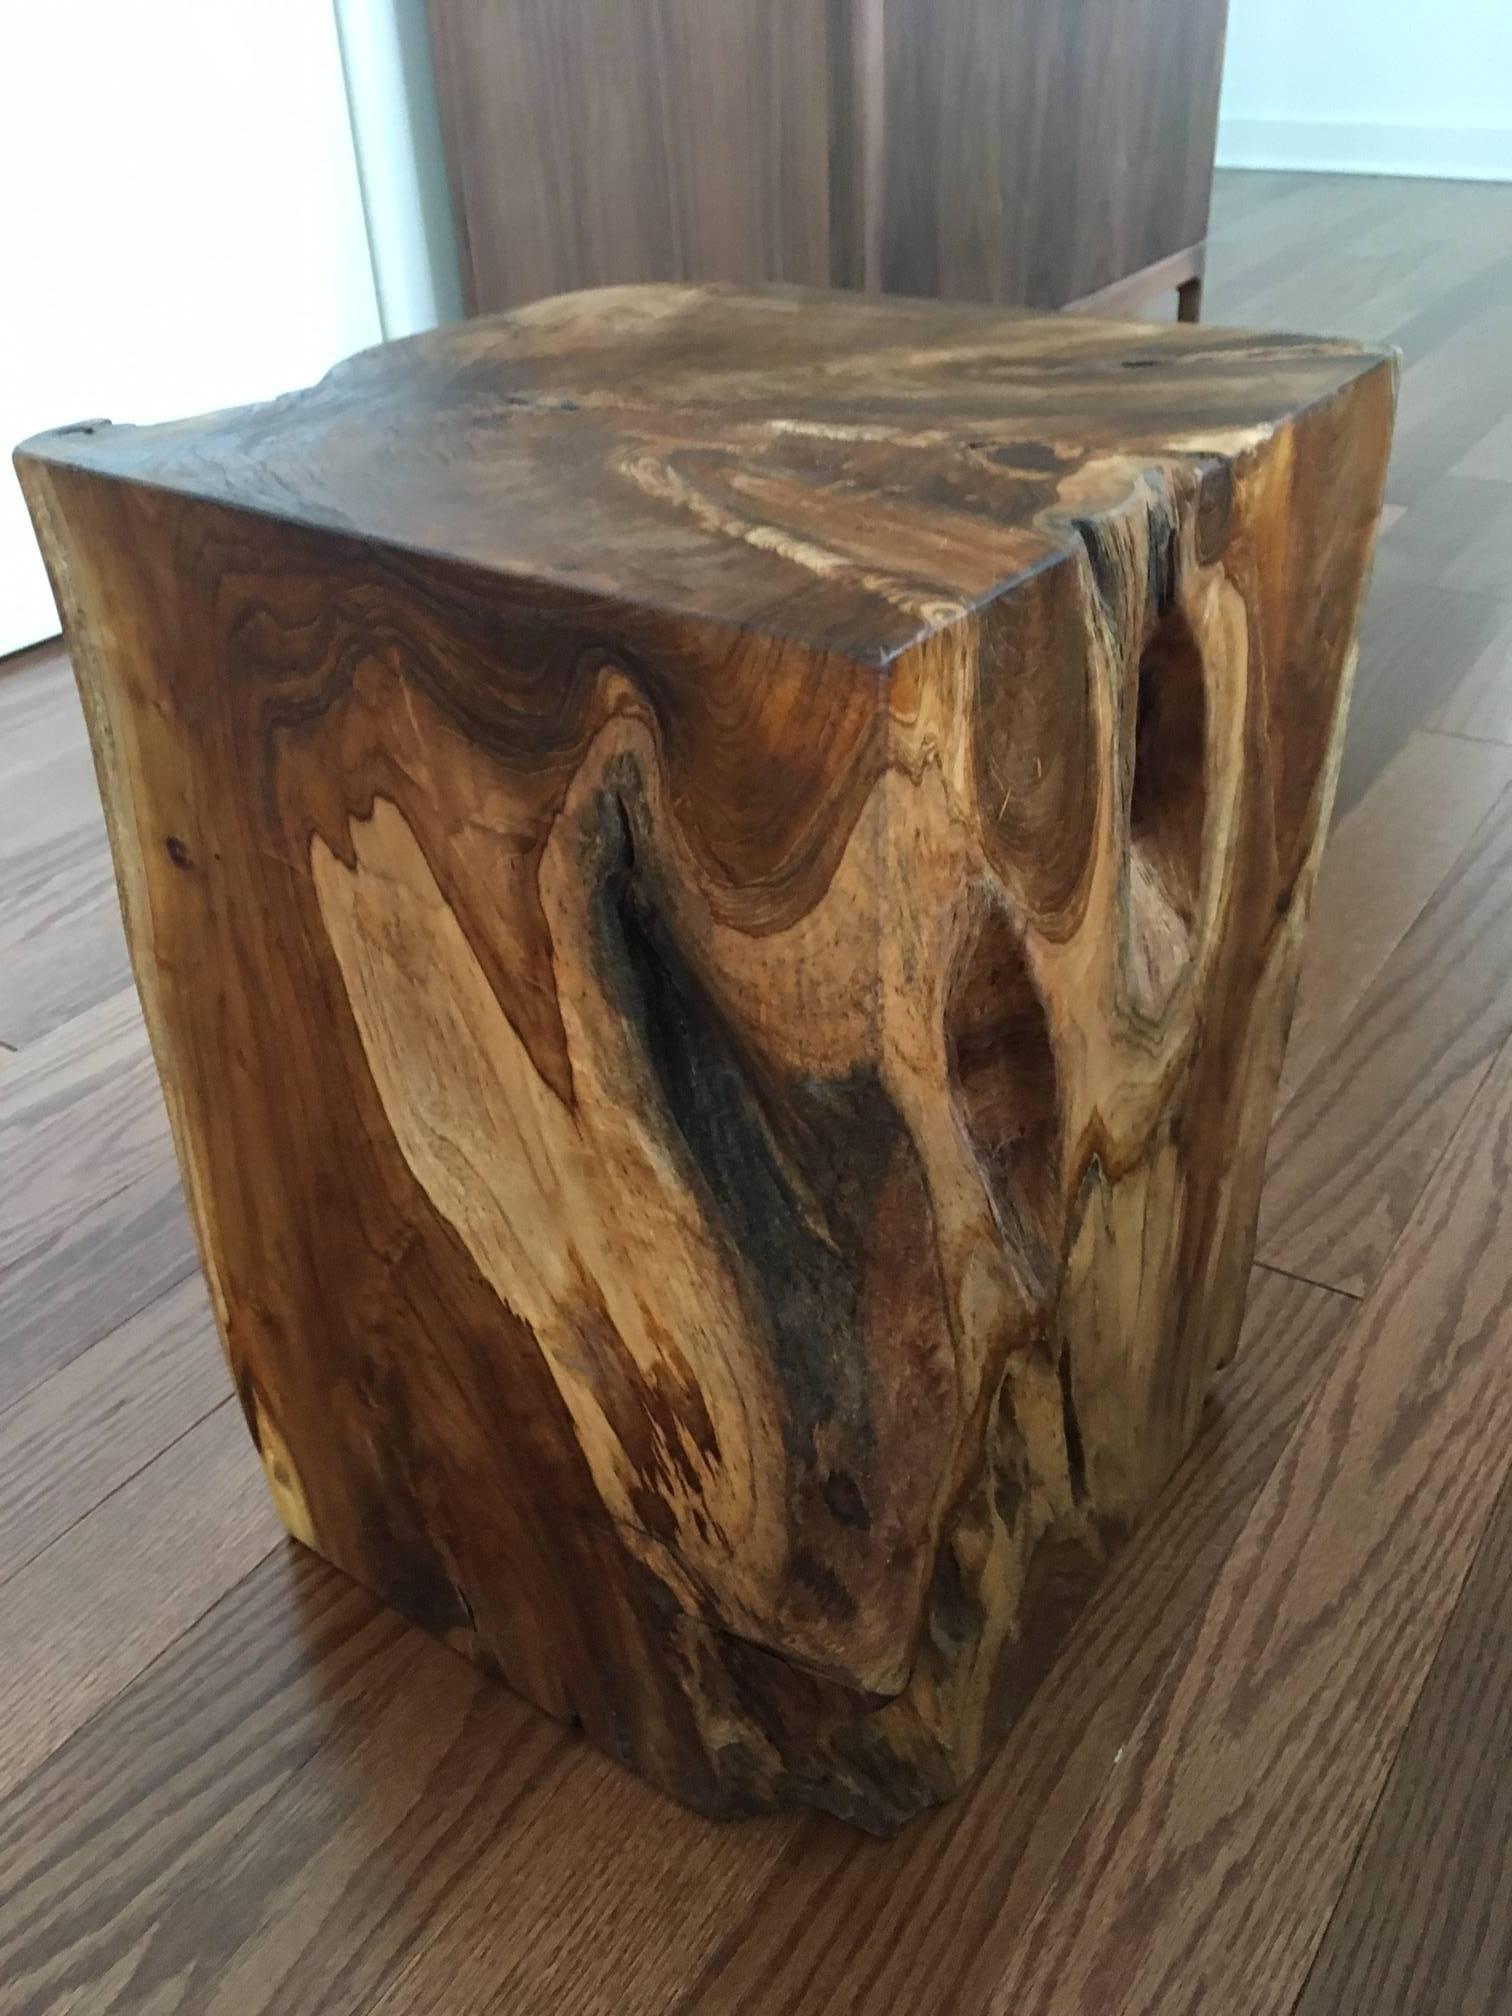 Stunning reclaimed teak root wood cube side table from Indonesia. Gorgeous wood variations and Formations on all four sides.